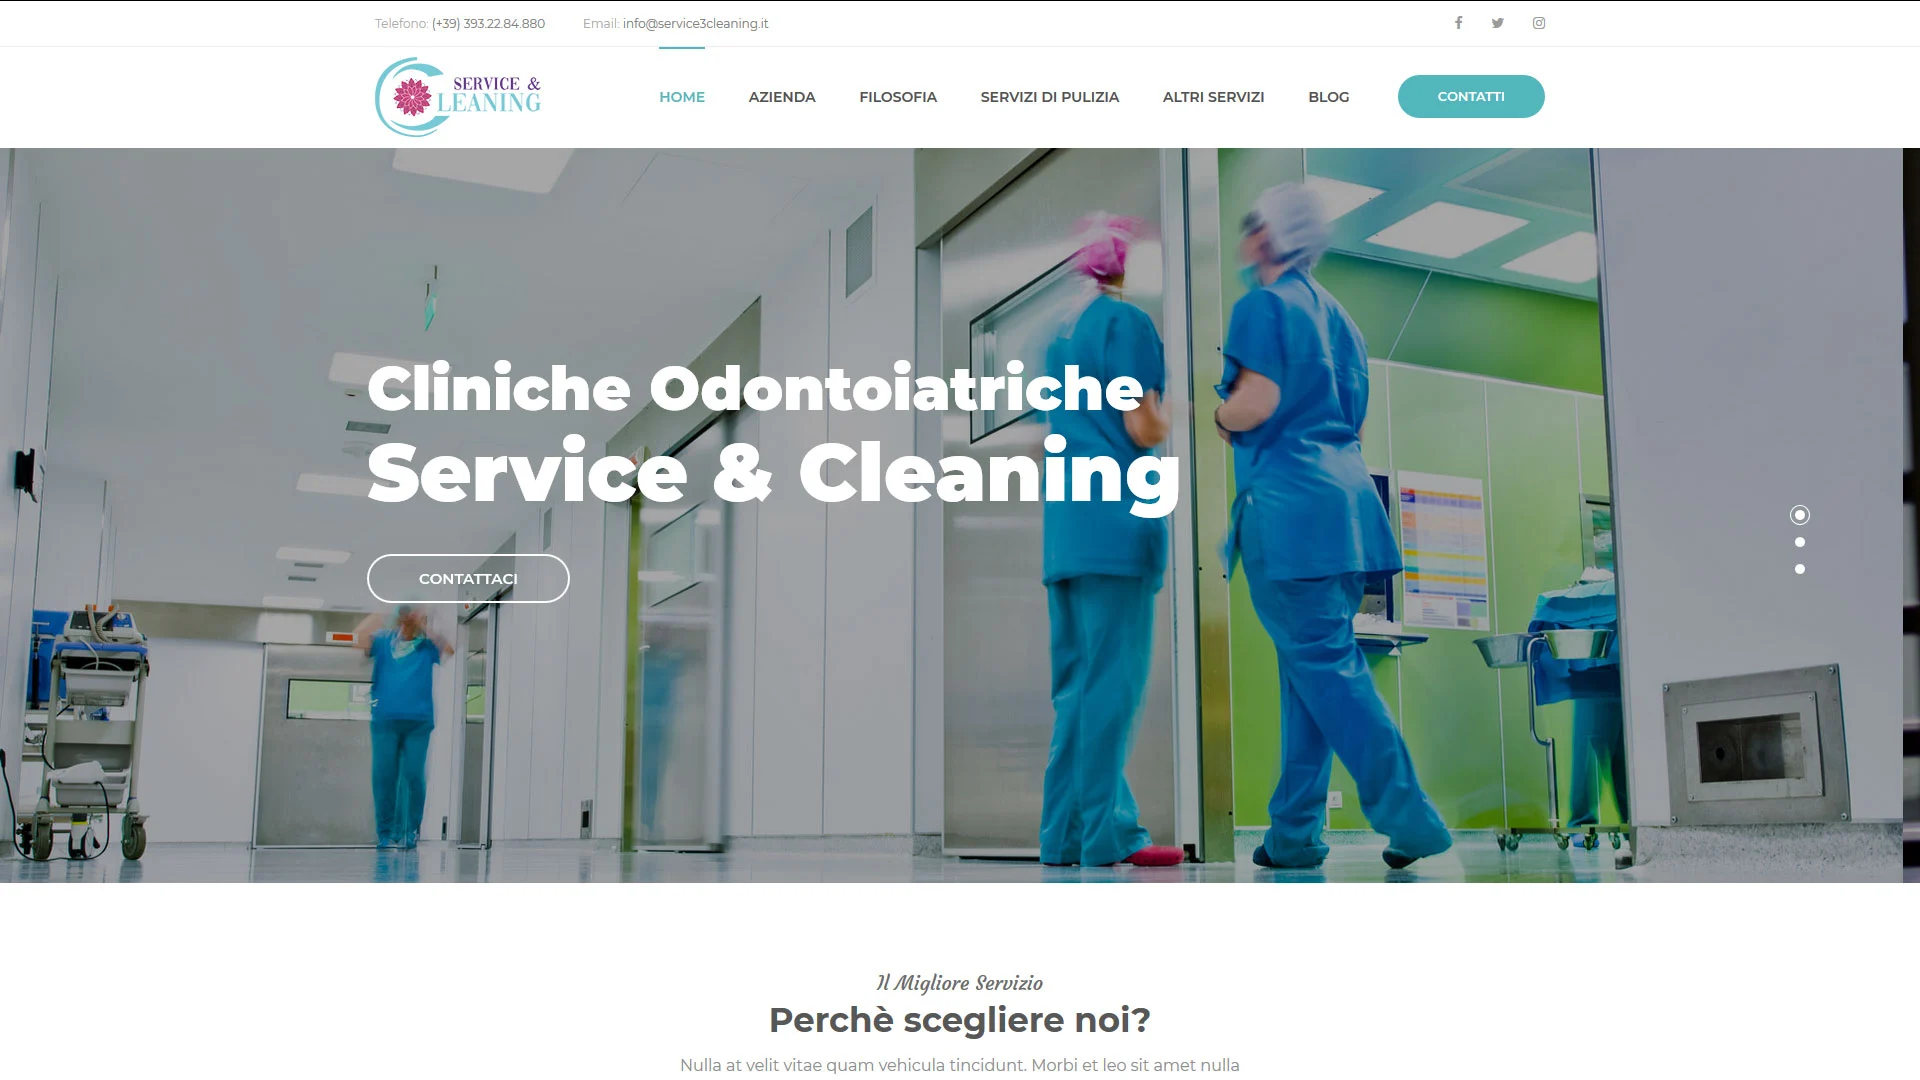 Service & Cleaning